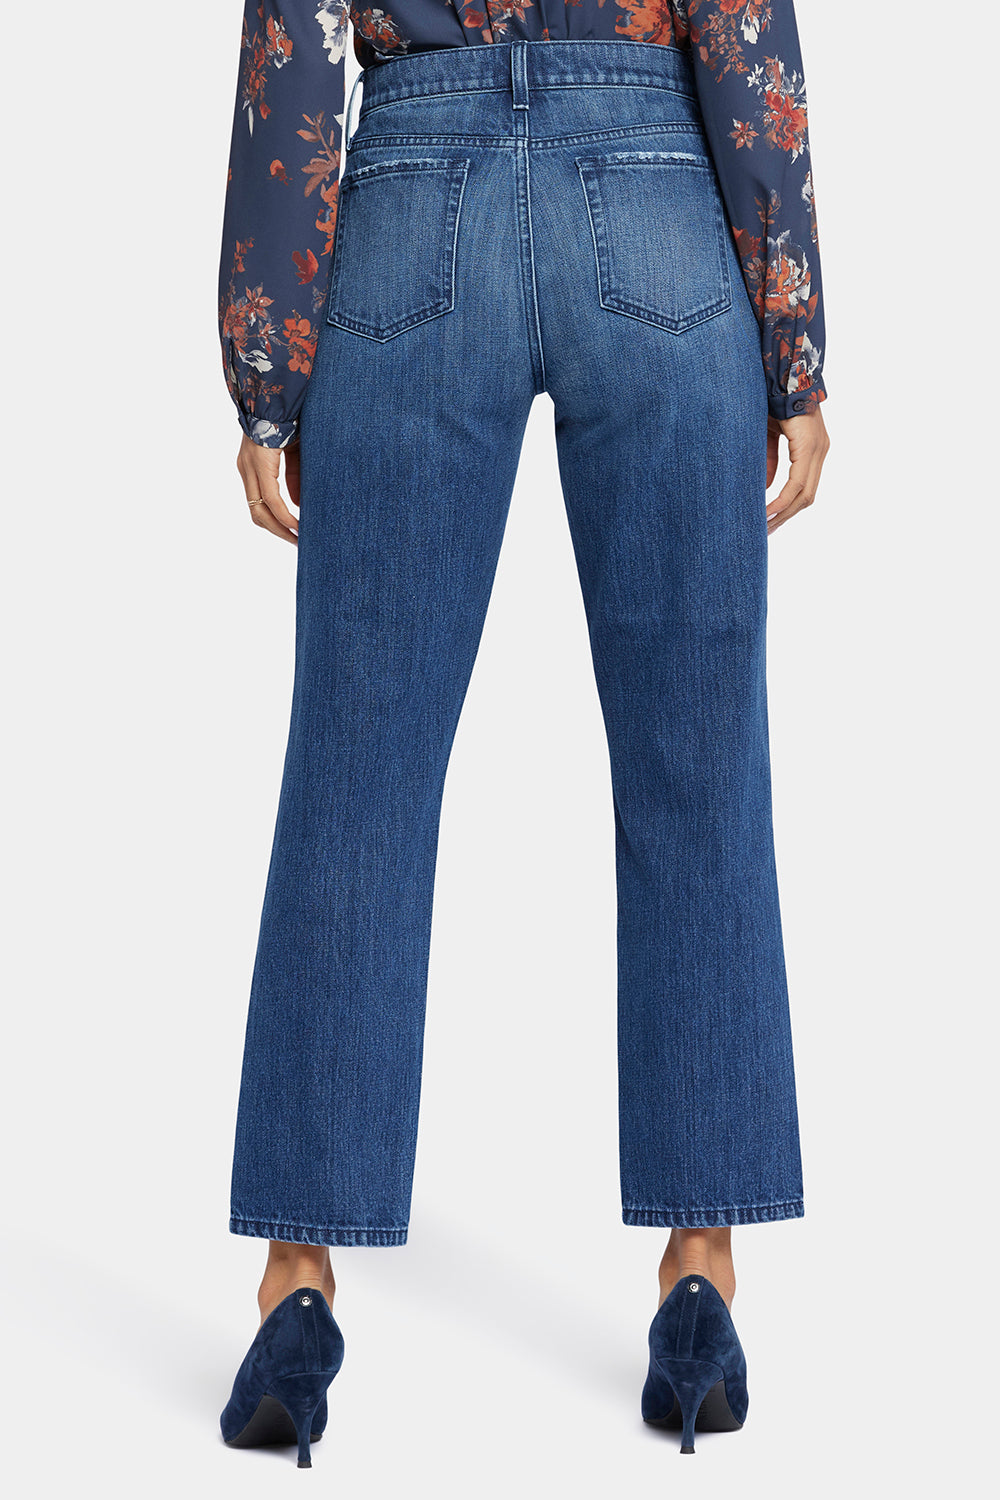 NYDJ Charlotte Relaxed Jeans In Rigid Denim With Super High Rise - Riverwalk